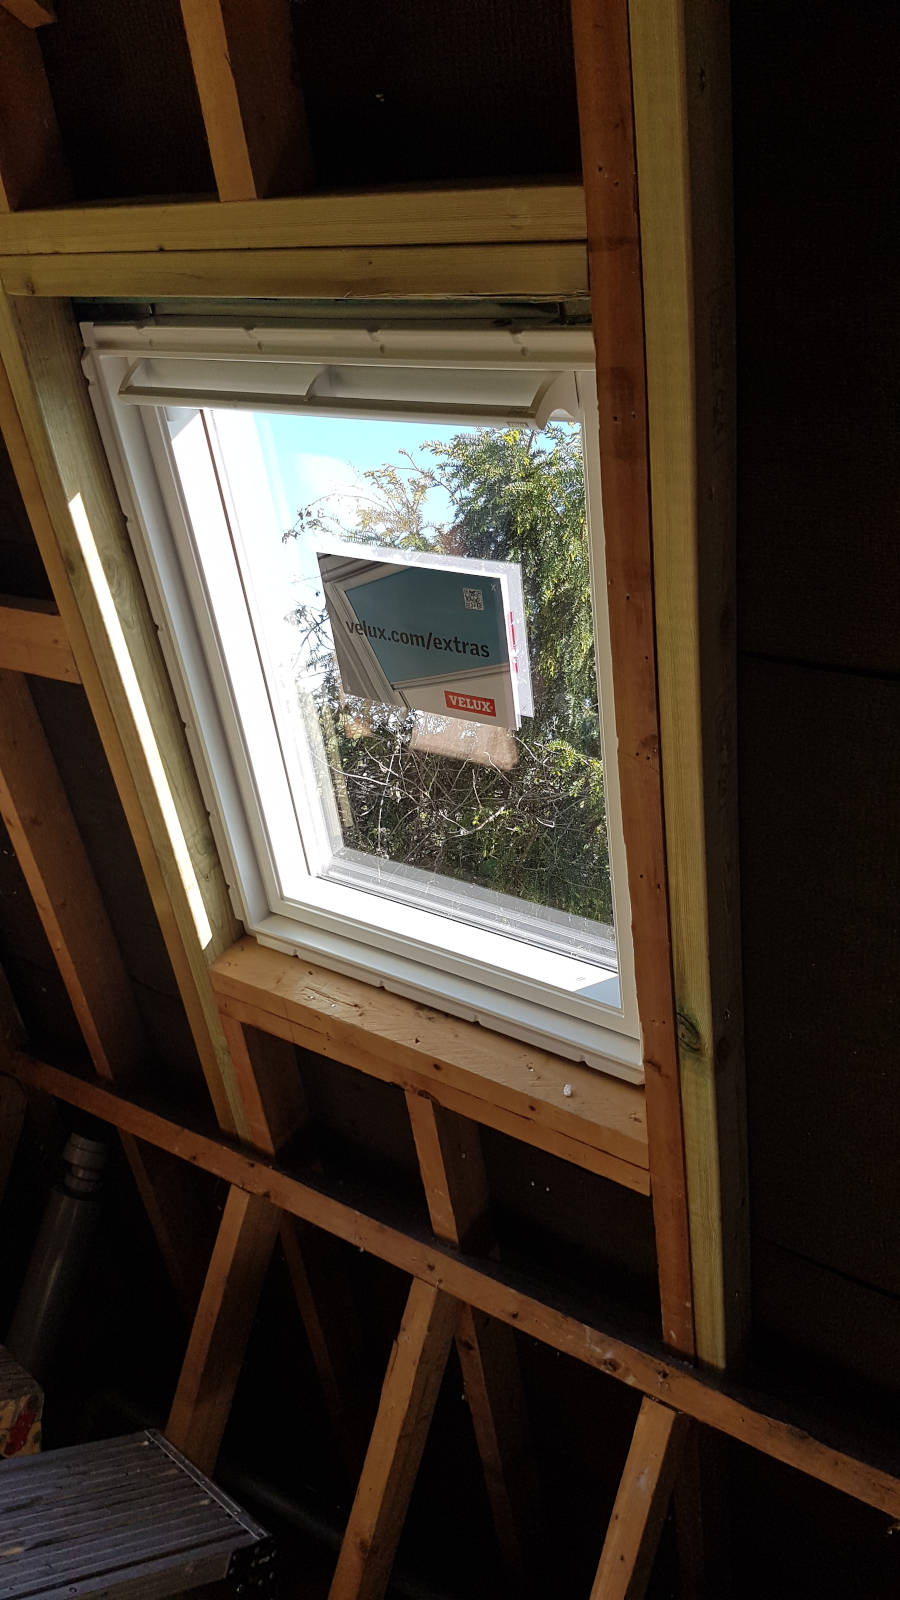 Image of chichester bathroom velux skylight and blind stage 1 window installed <h2>2021-08-06 - Bringing Light and Shade to a Bathroom in Chichester</h2>